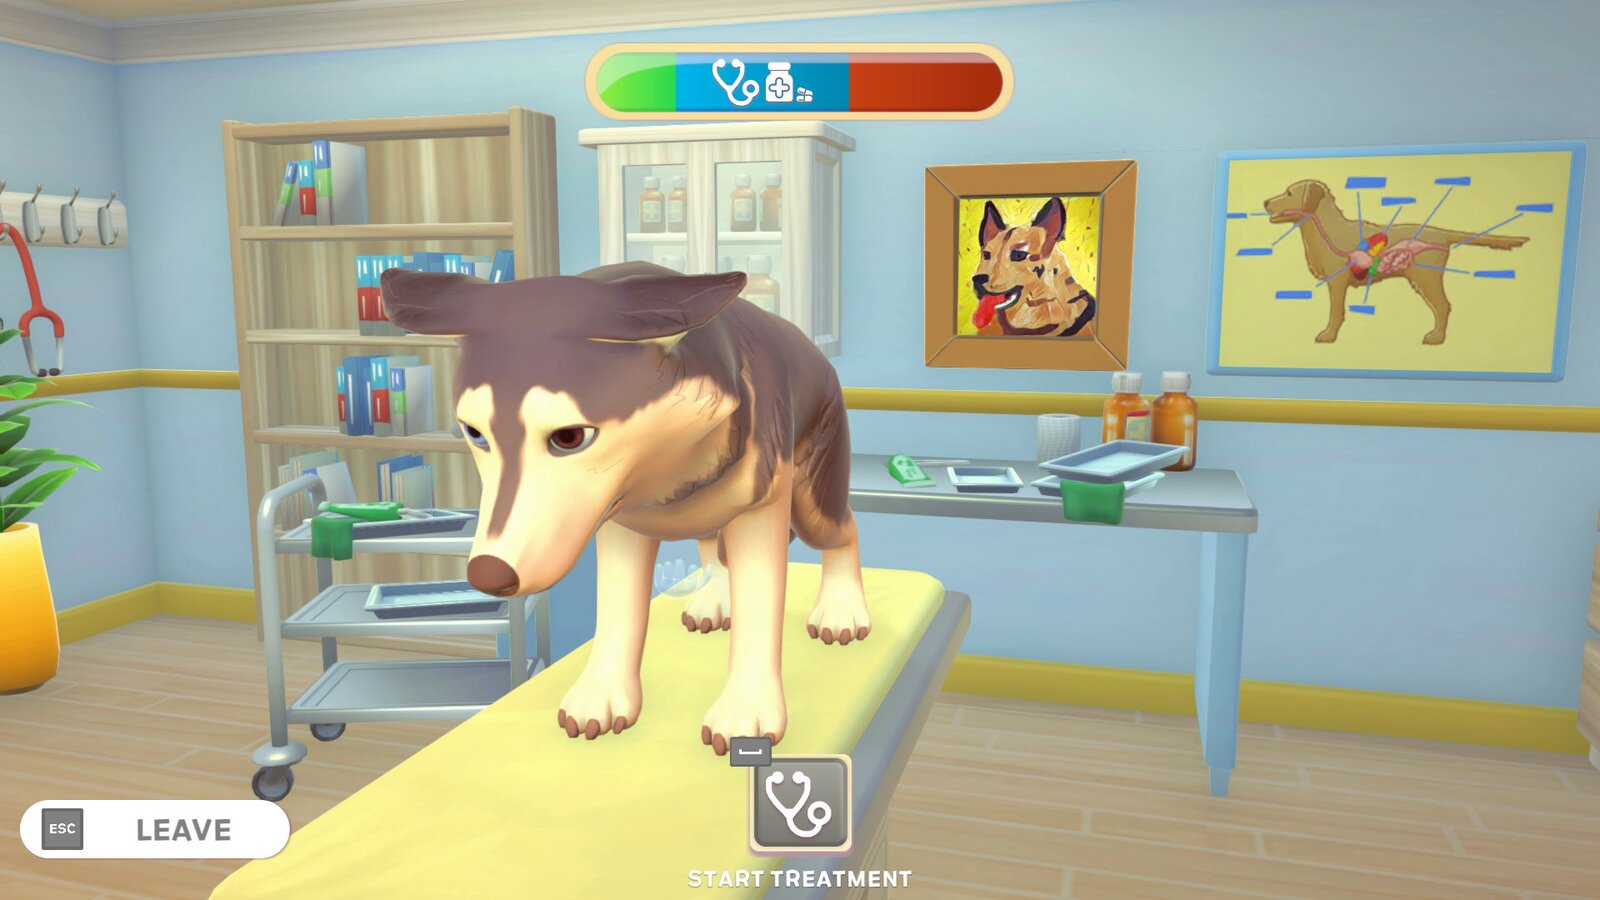 My Universe - Pet Clinic Cats & Dogs